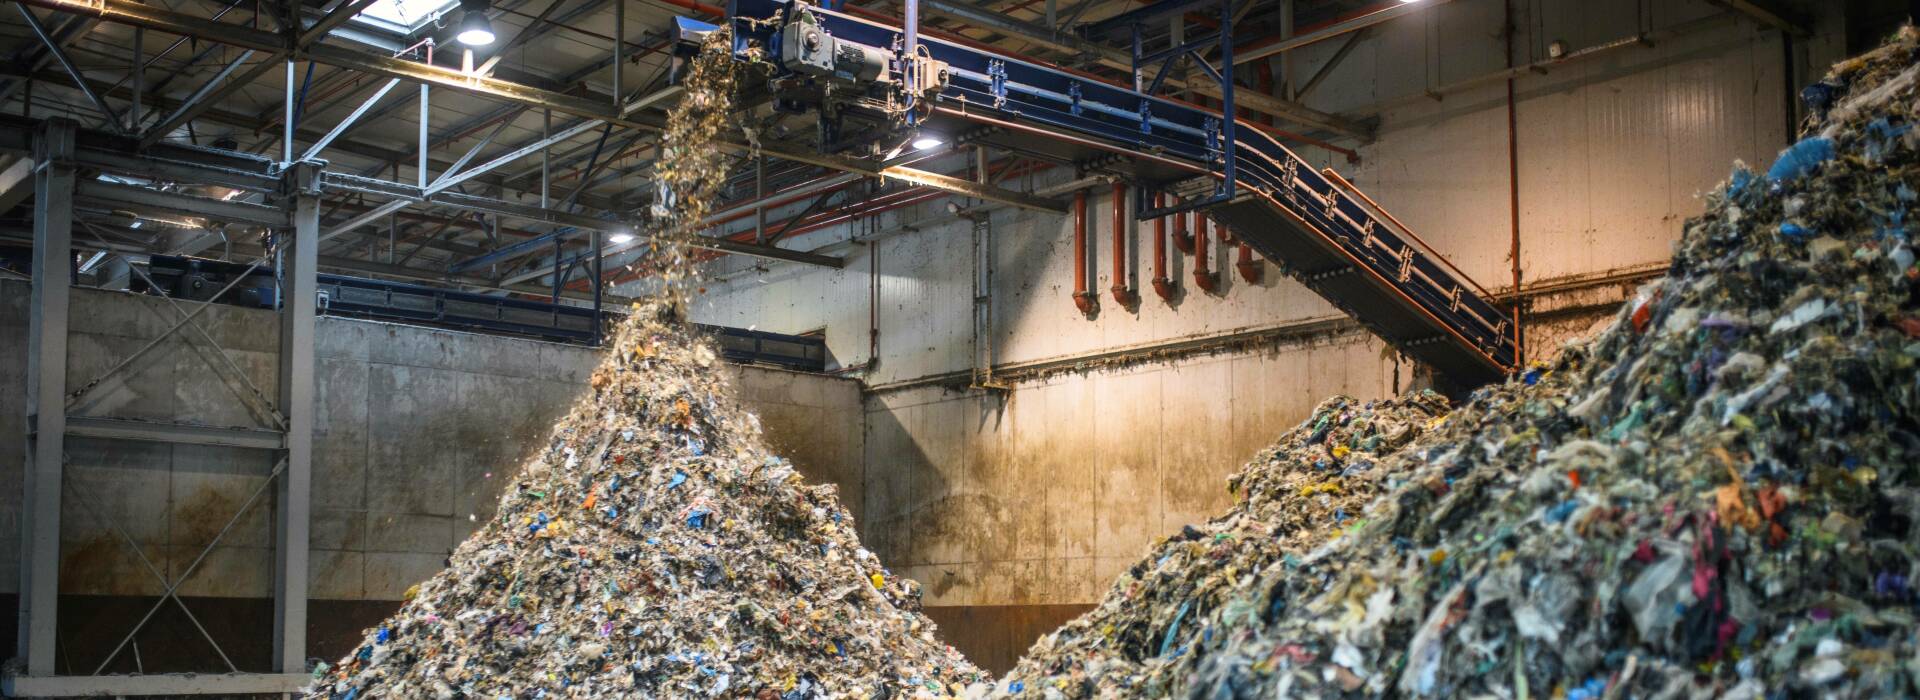 machine creating piles of recycling